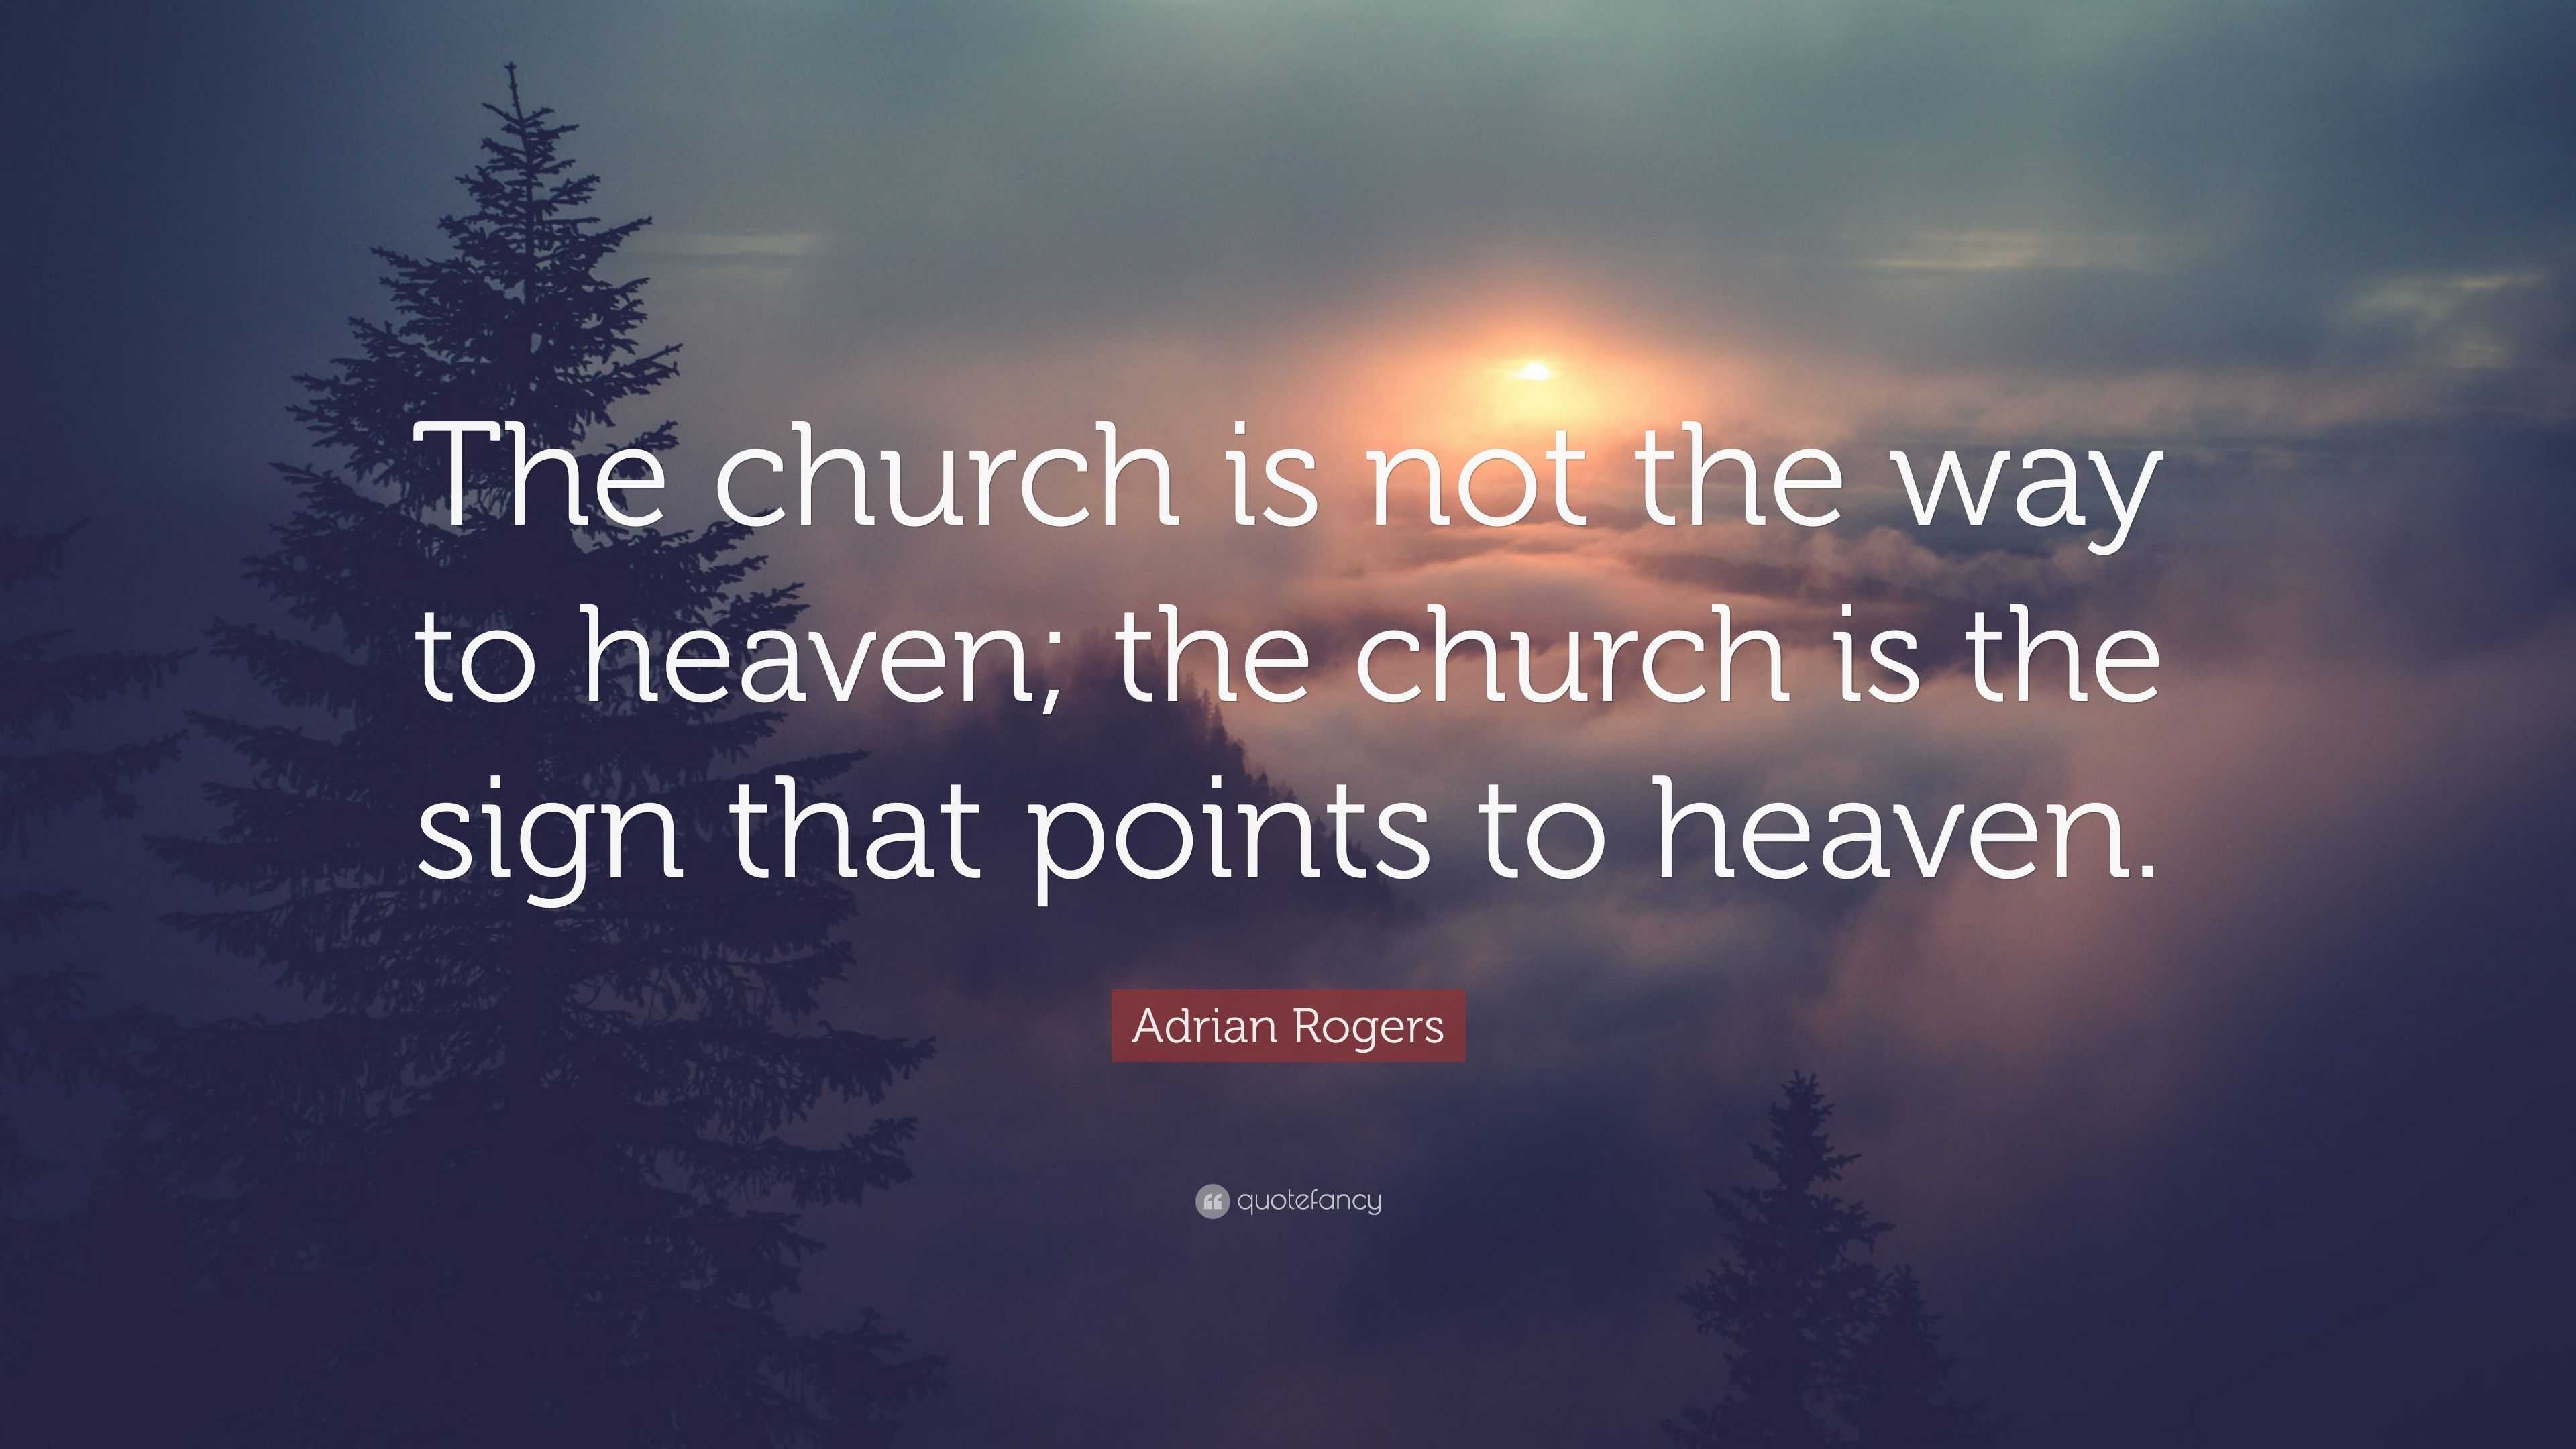 4848956 Adrian Rogers Quote The church is not the way to heaven the church